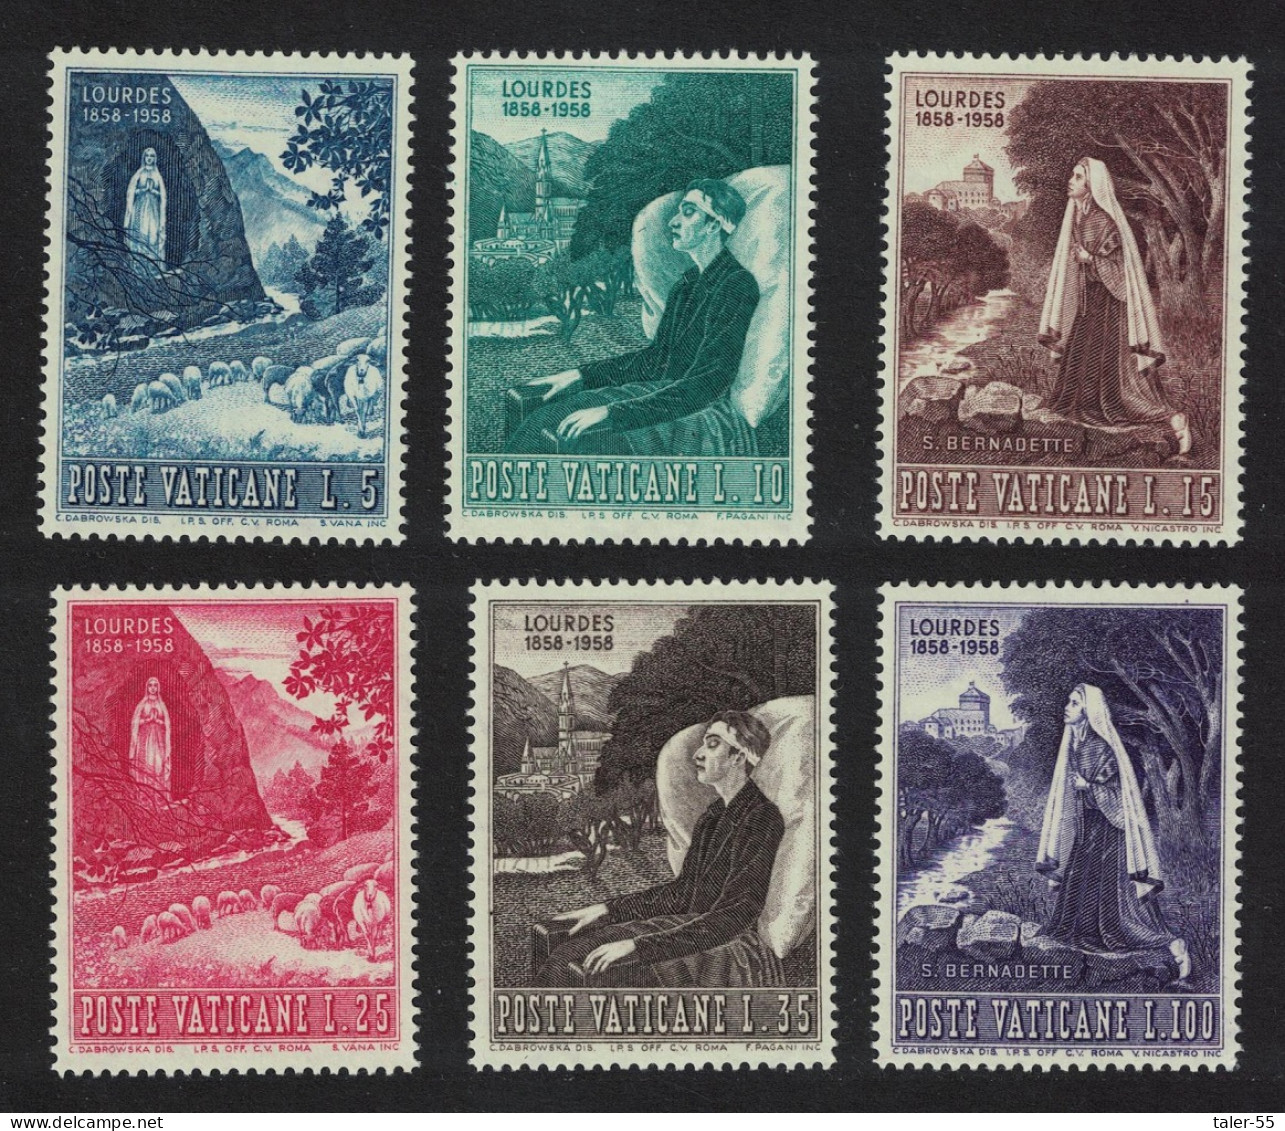 Vatican Apparition Of The Virgin Mary At Lourdes 6v 1958 MNH SG#265-270 Sc#233-238 - Unused Stamps